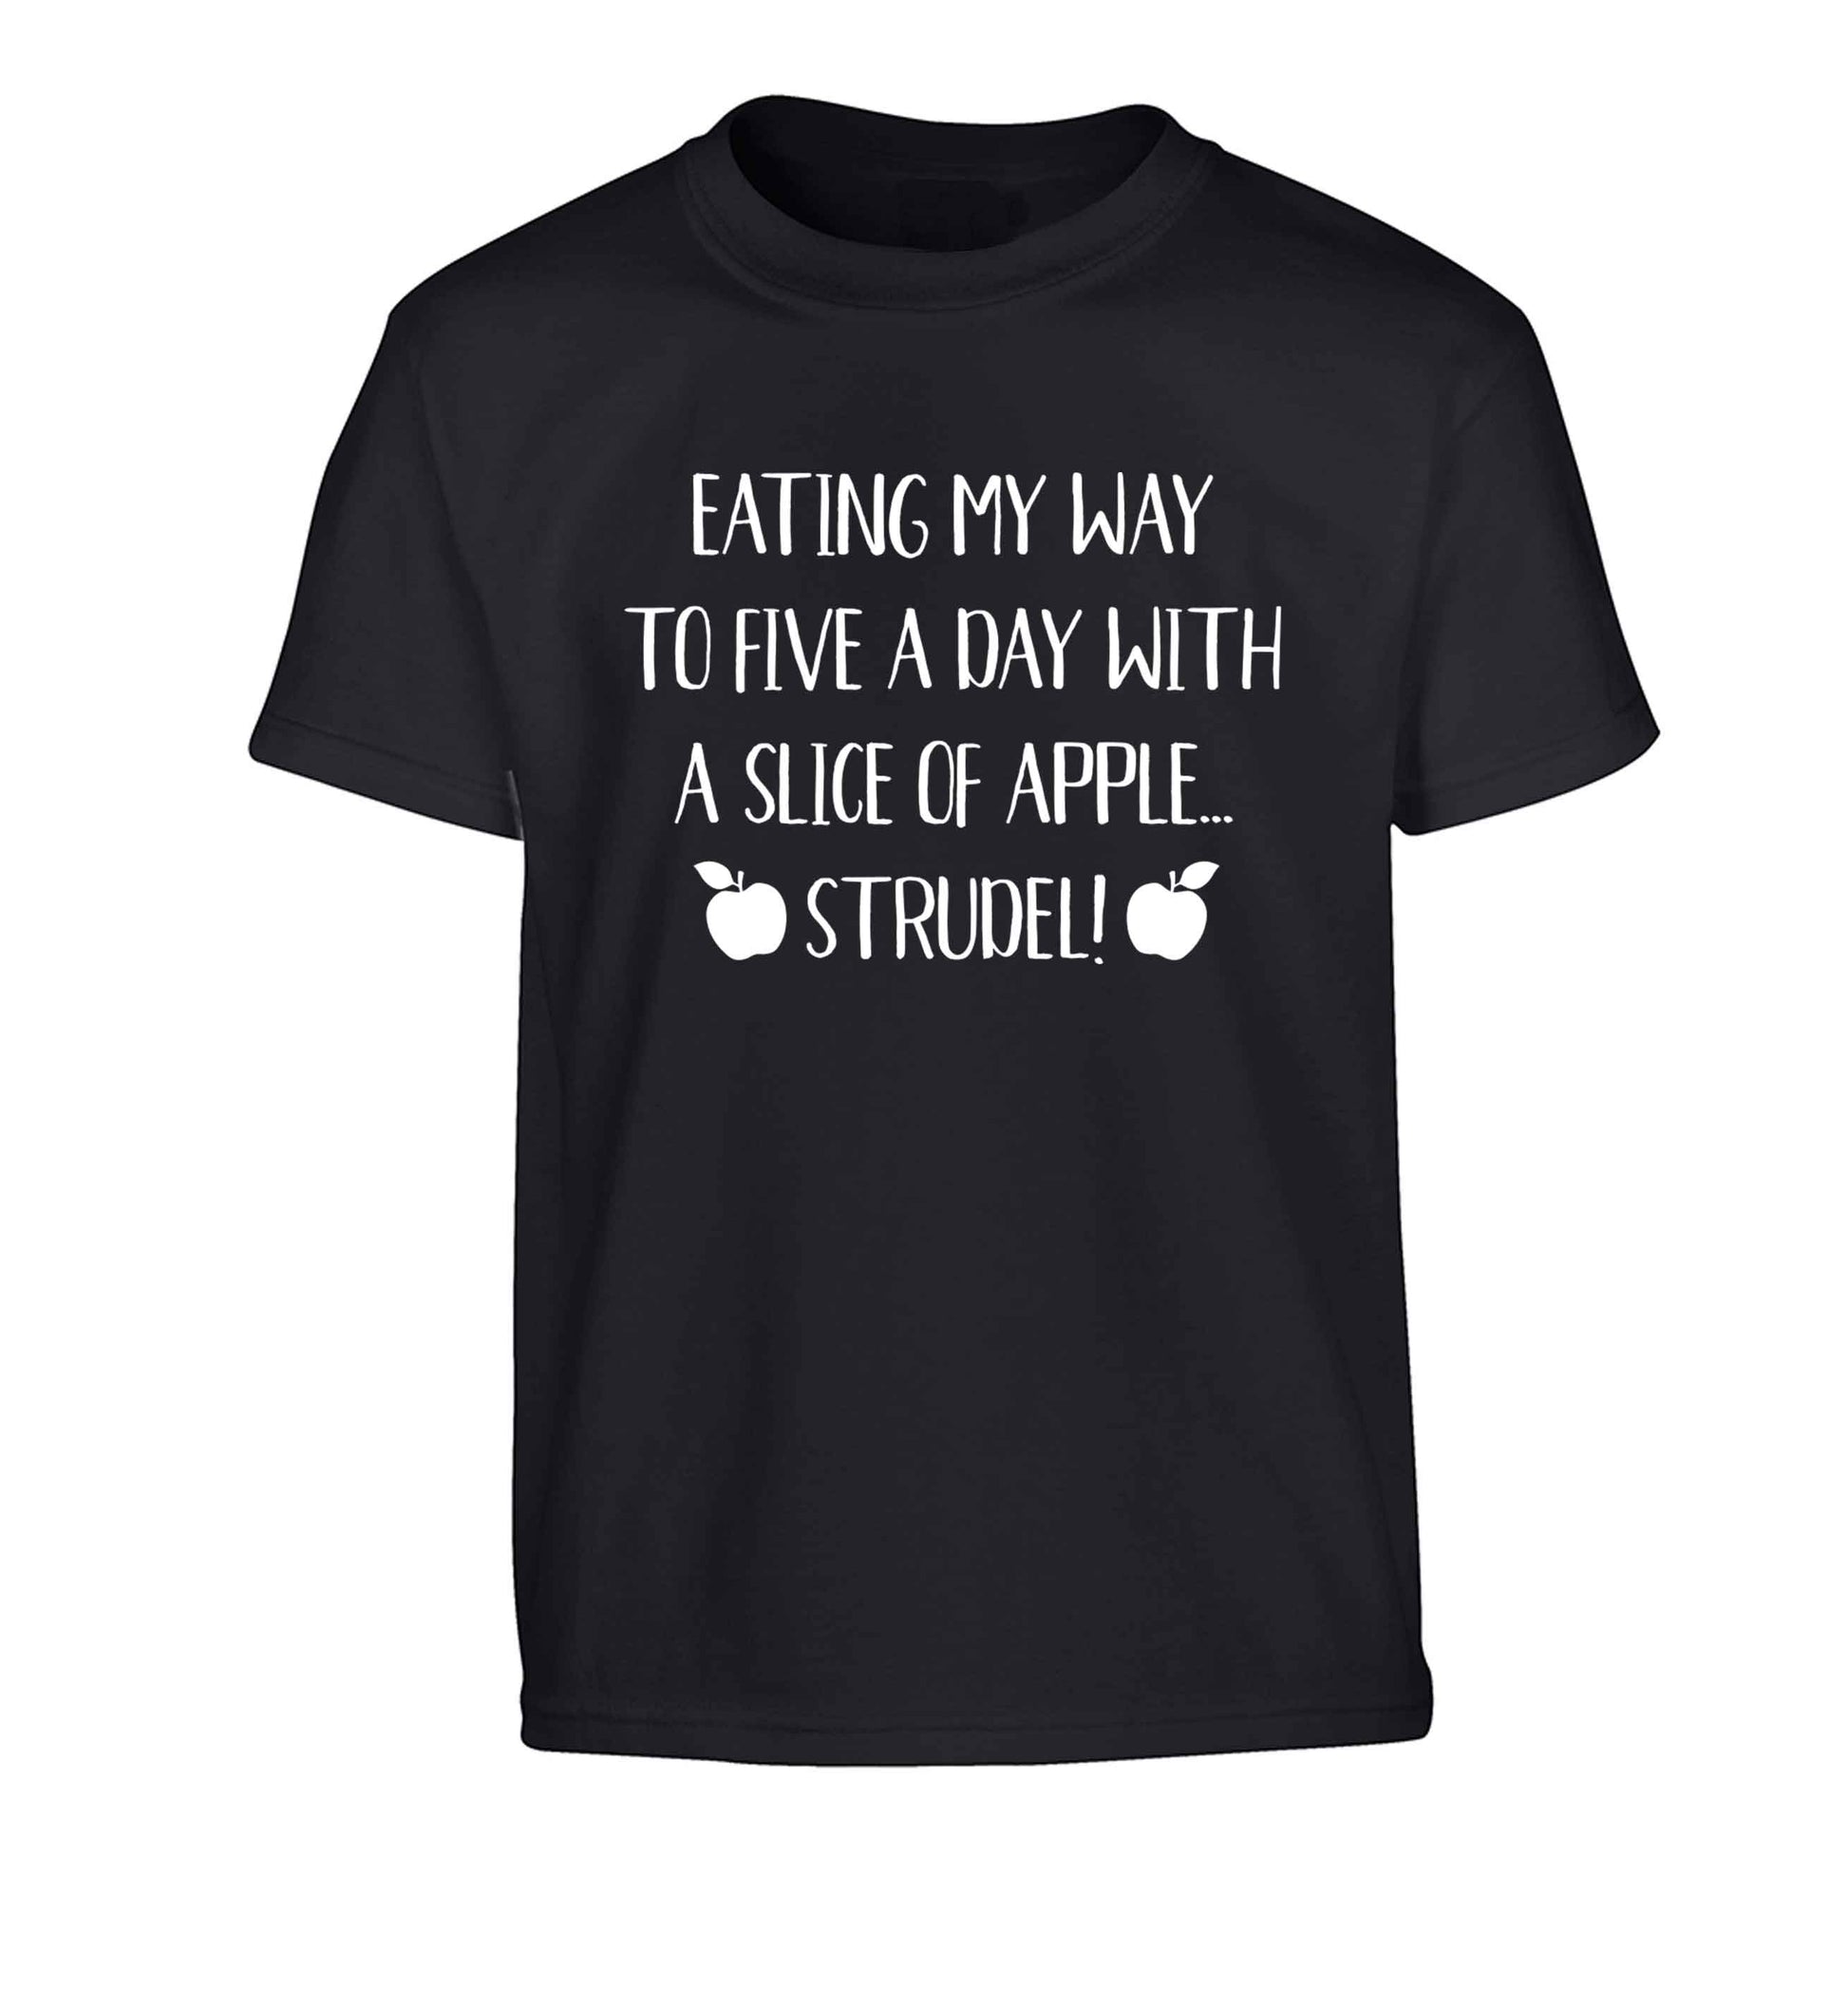 Eating my way to five a day with a slice of apple strudel Children's black Tshirt 12-13 Years